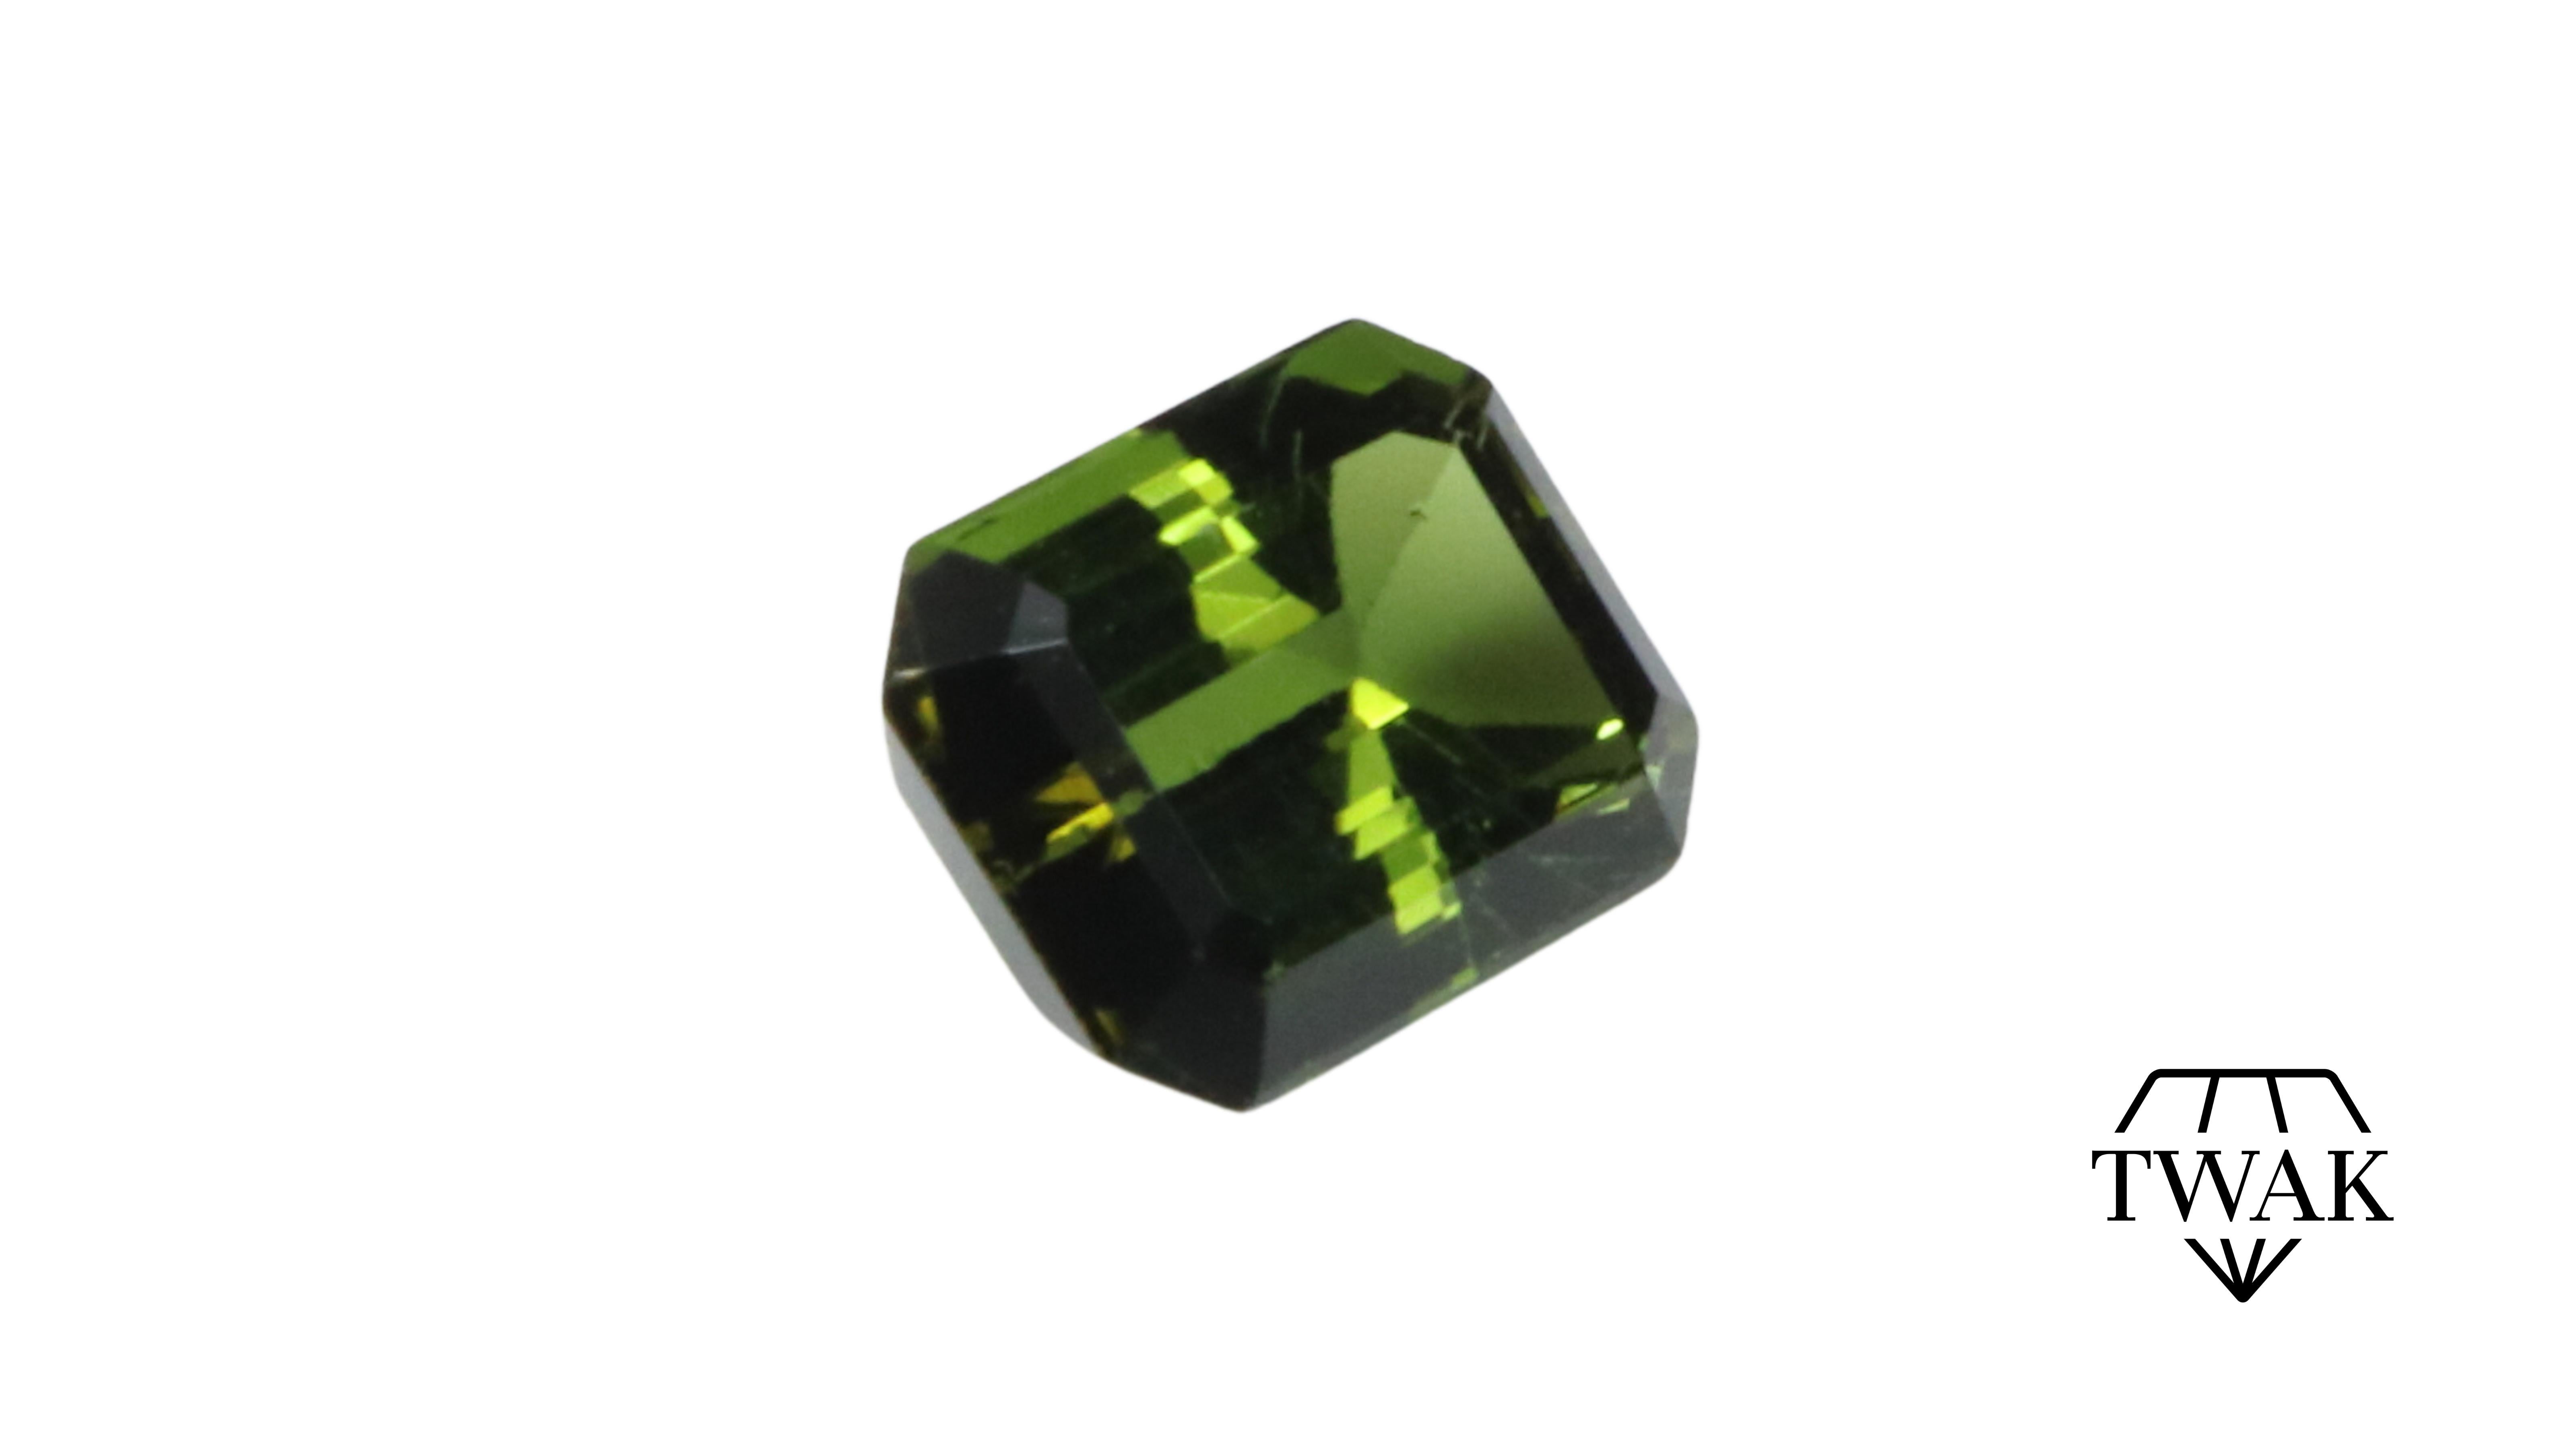 One Green Tourmaline, rectangular / emerald cut.

A beautifully cut stone with brilliance and excellent color depth. It has the same Intense/Vivid Green color with Yellow overtones of the chrome tourmalines.

Details and description:
Color: